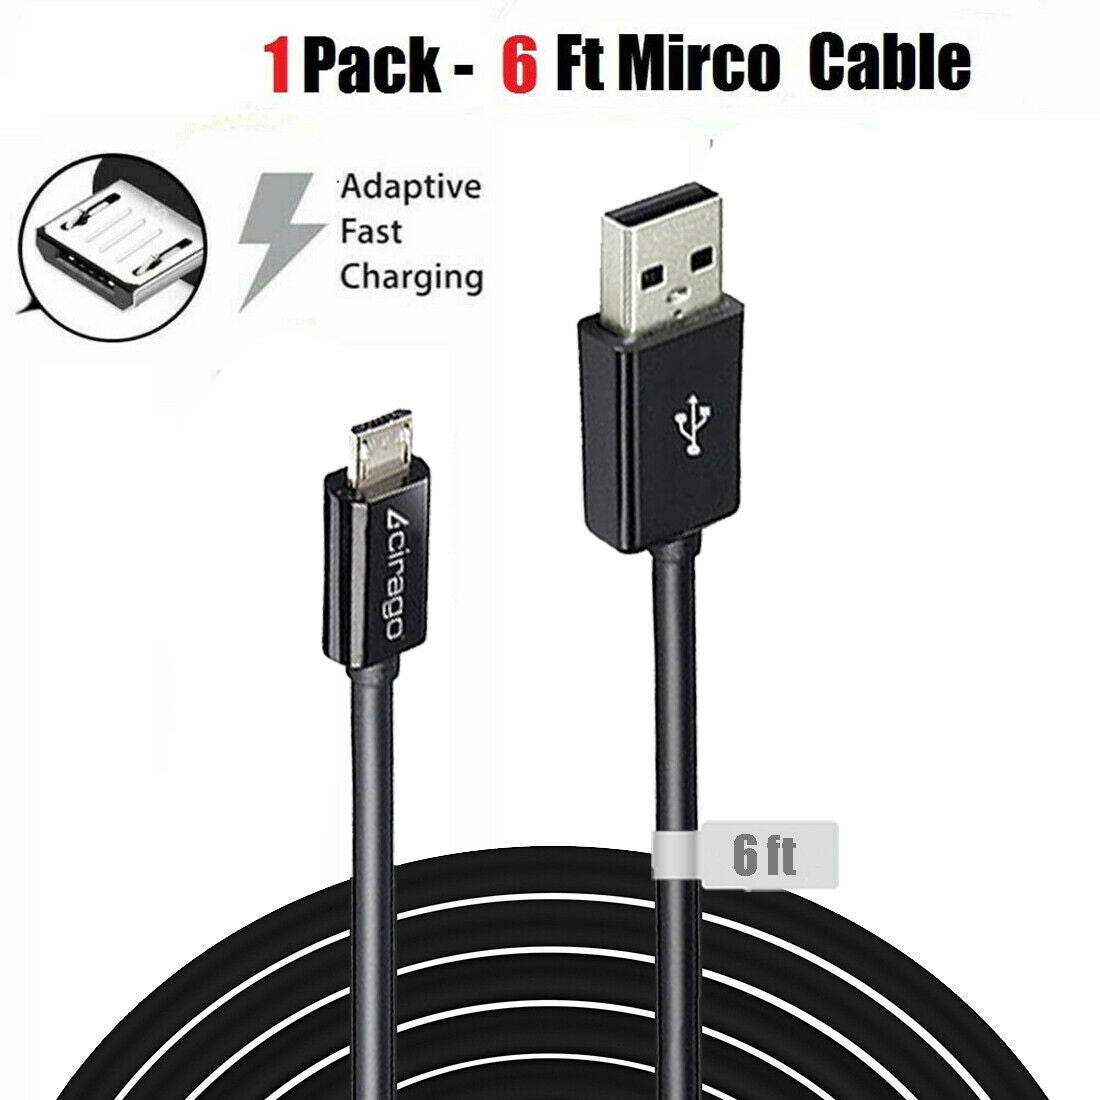 Cirago Micro USB to USB Data Sync/Charging Cable Cord for Samsung Android HTC LG